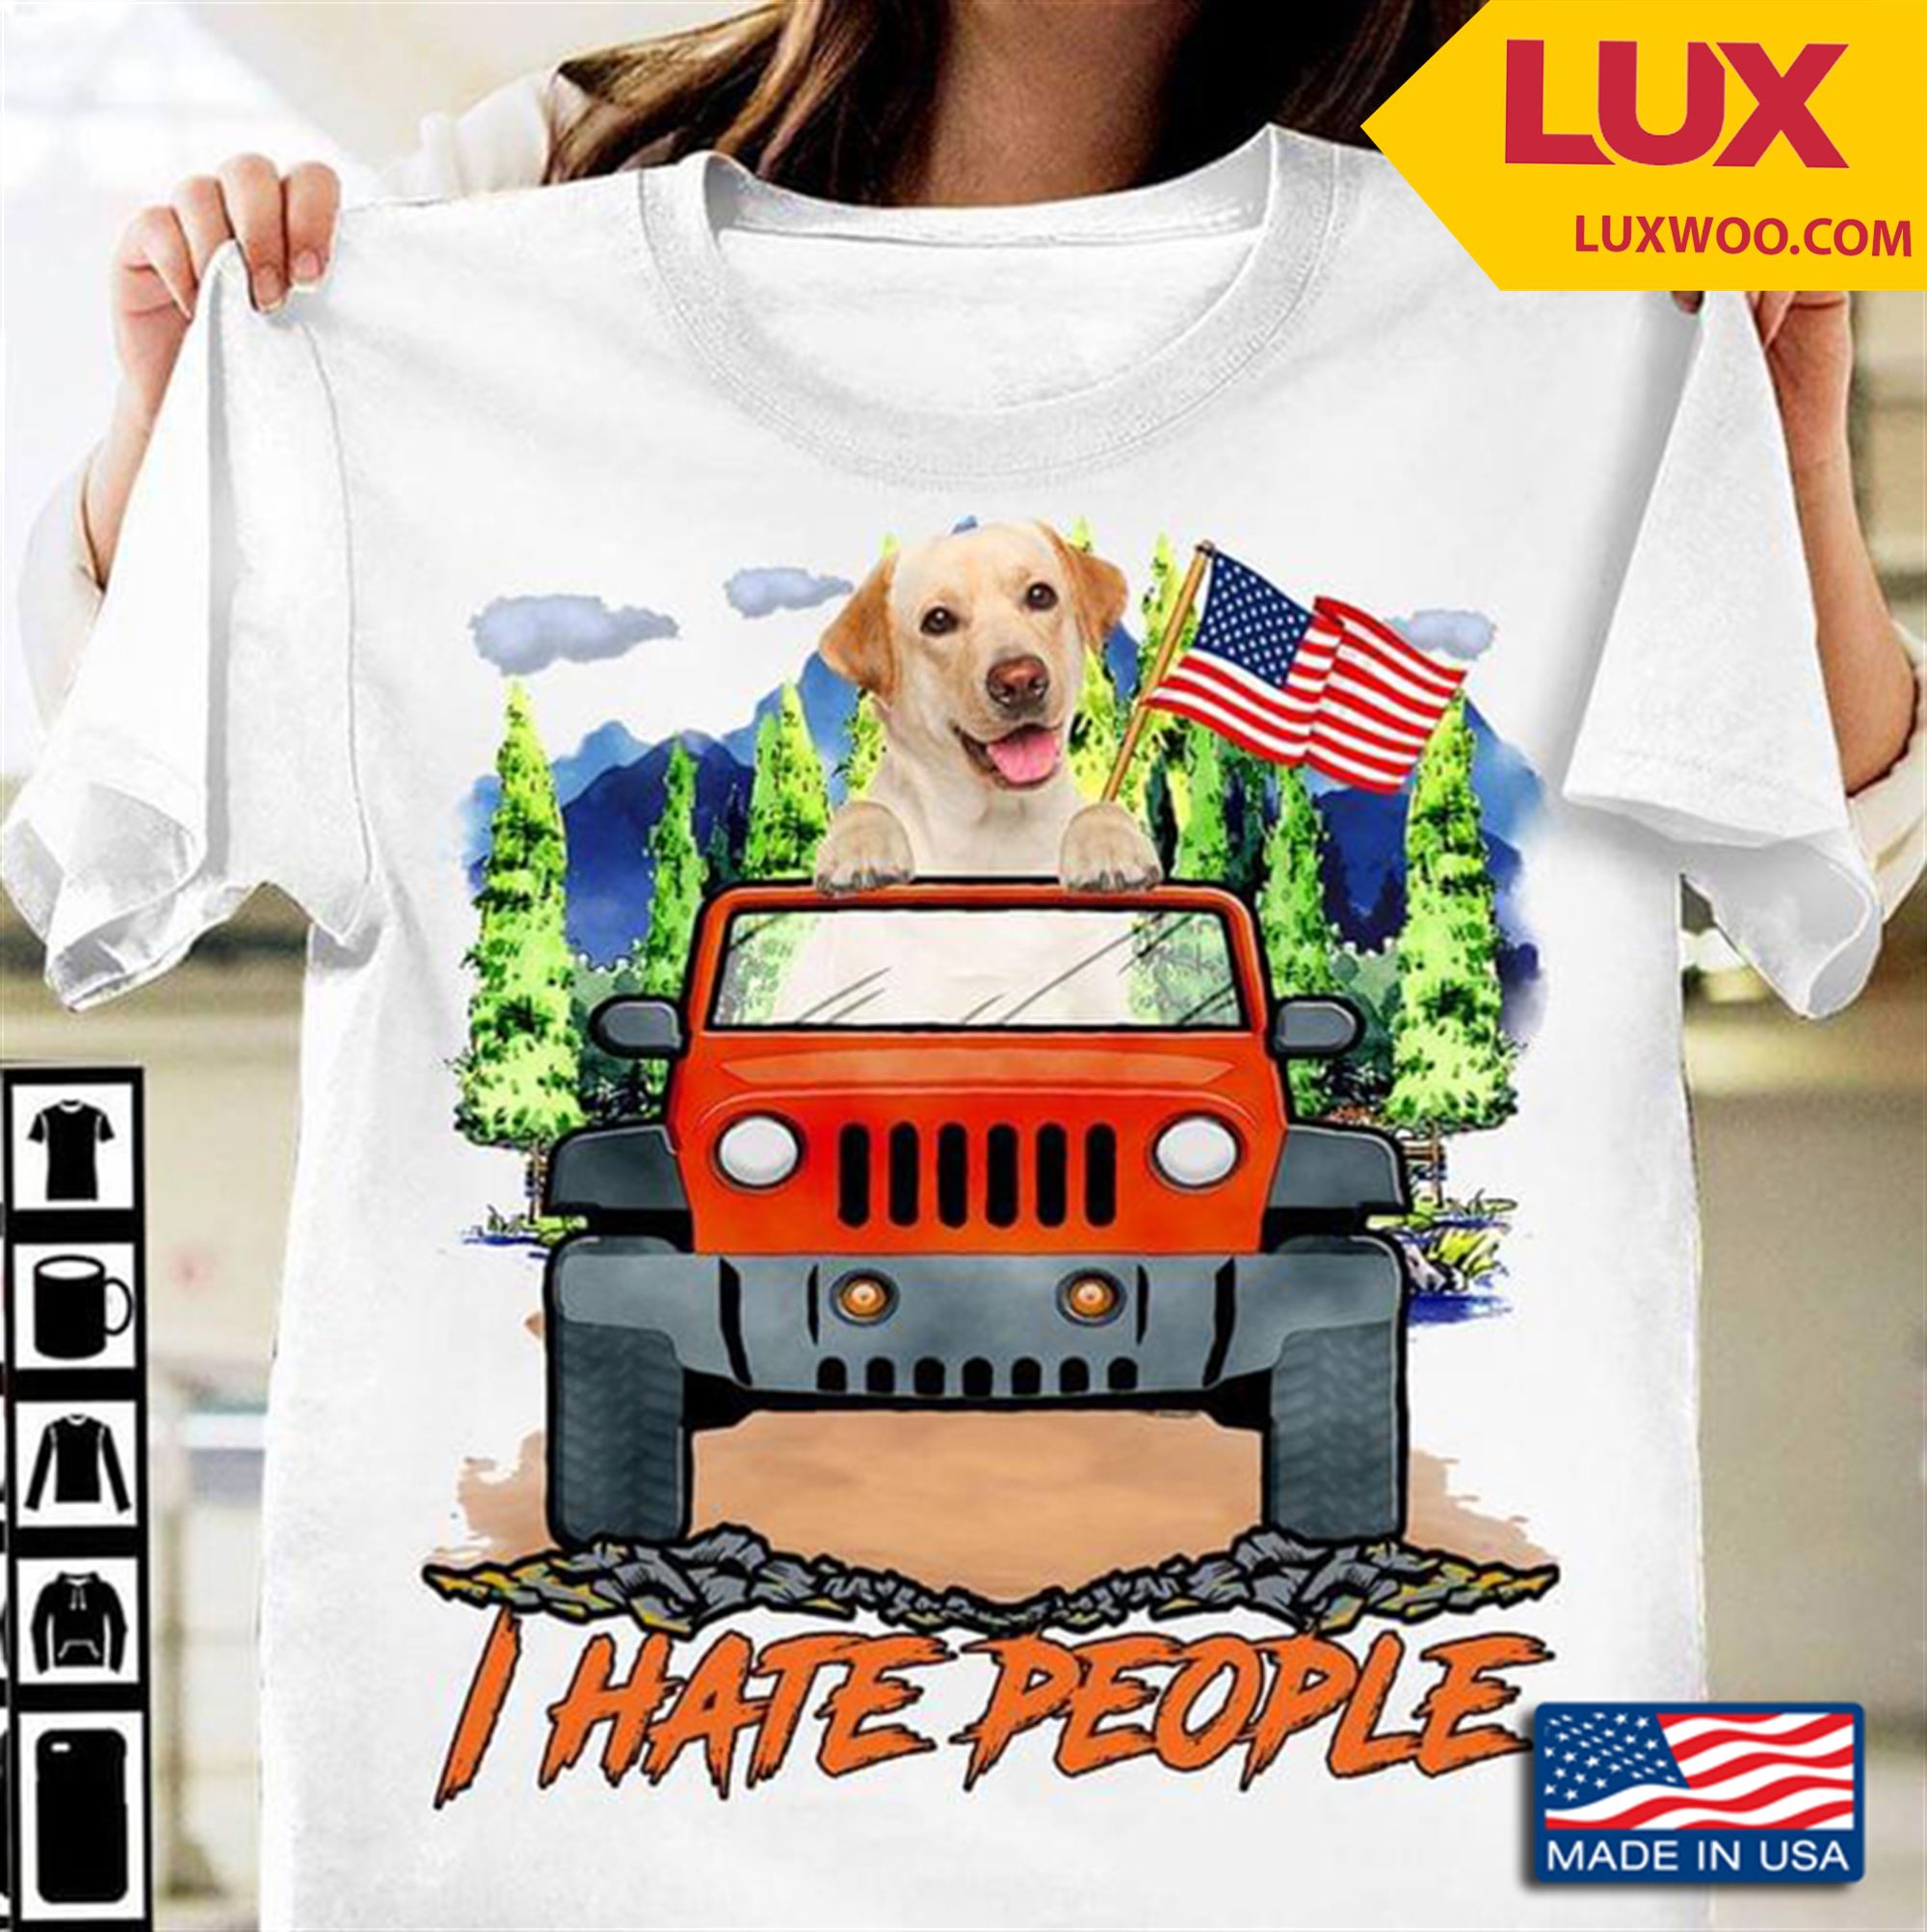 Labrador Retriever With American Flag And Jeep I Hate People Shirt Size Up To 5xl